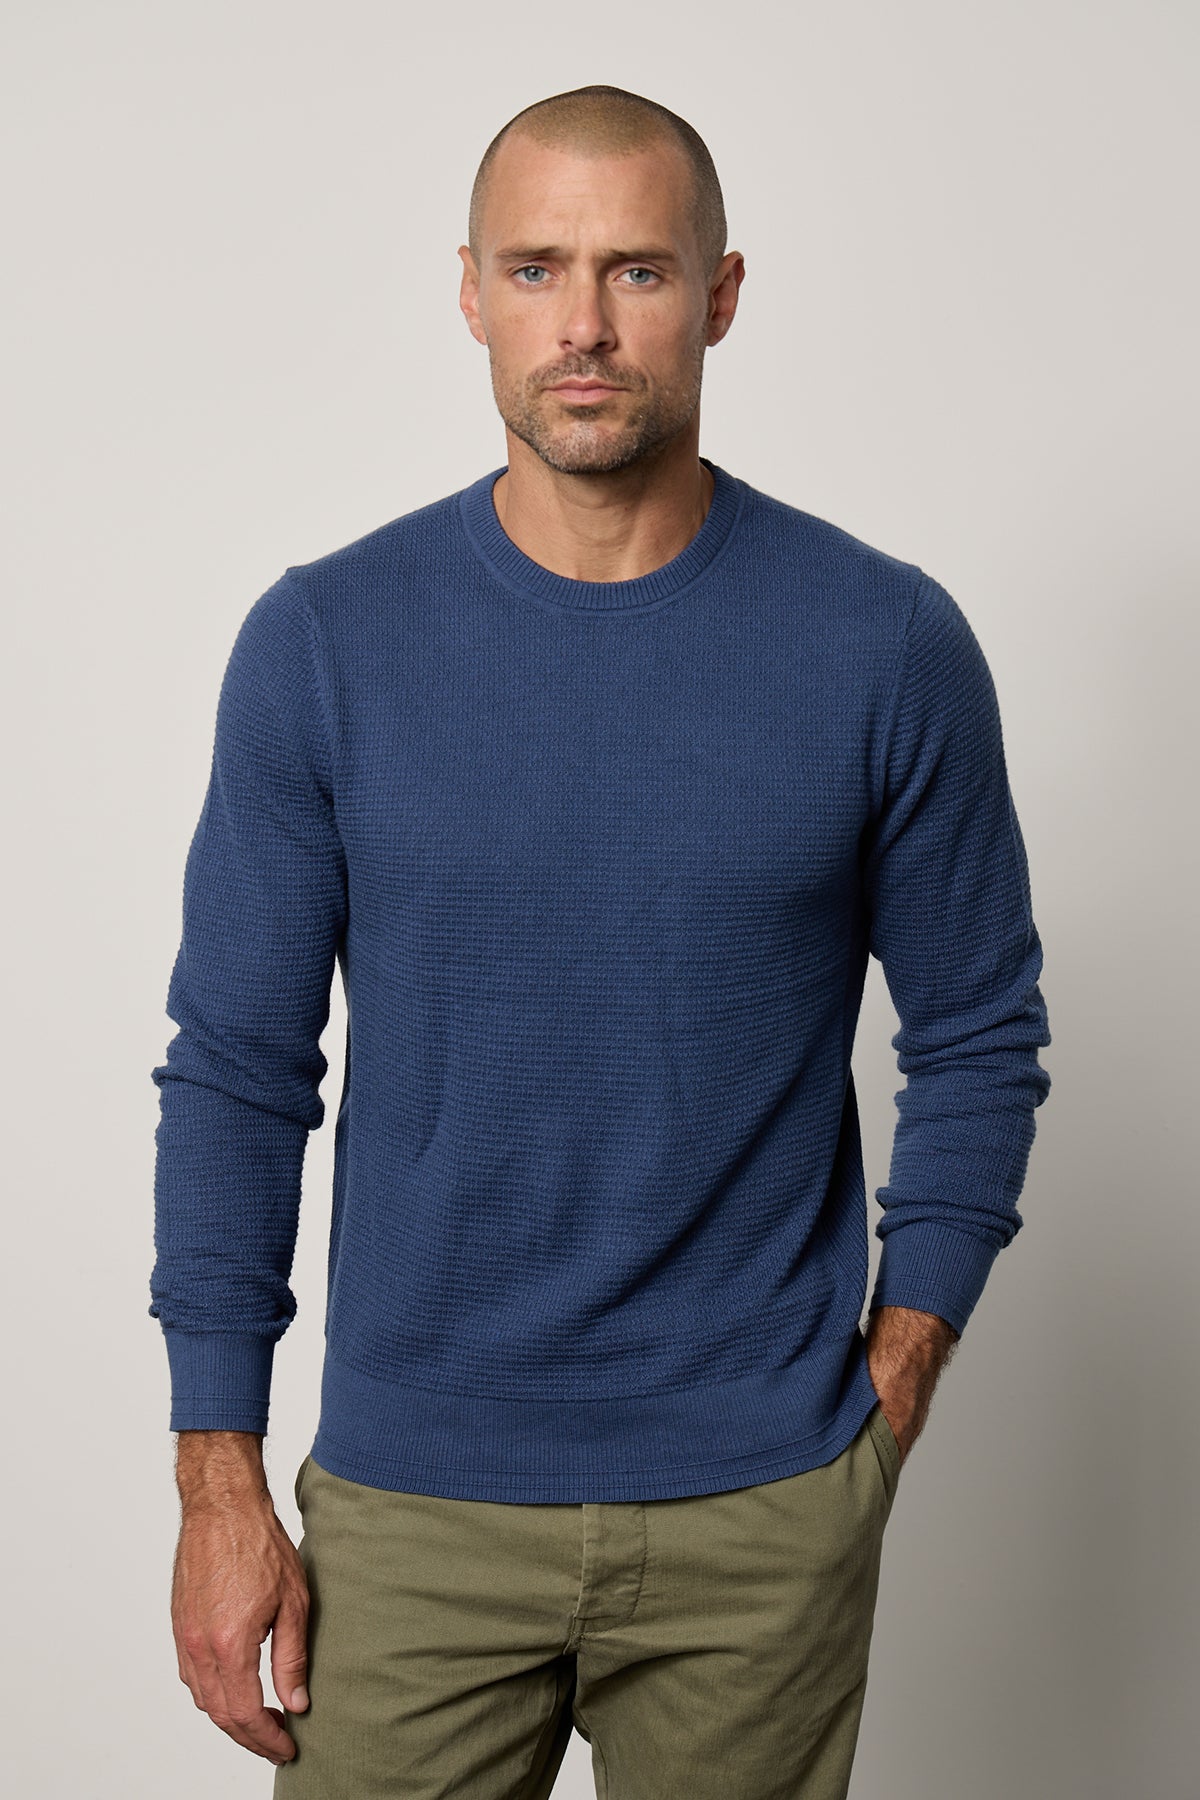 Ace Thermal Crew in anchor blue front-25943733698753